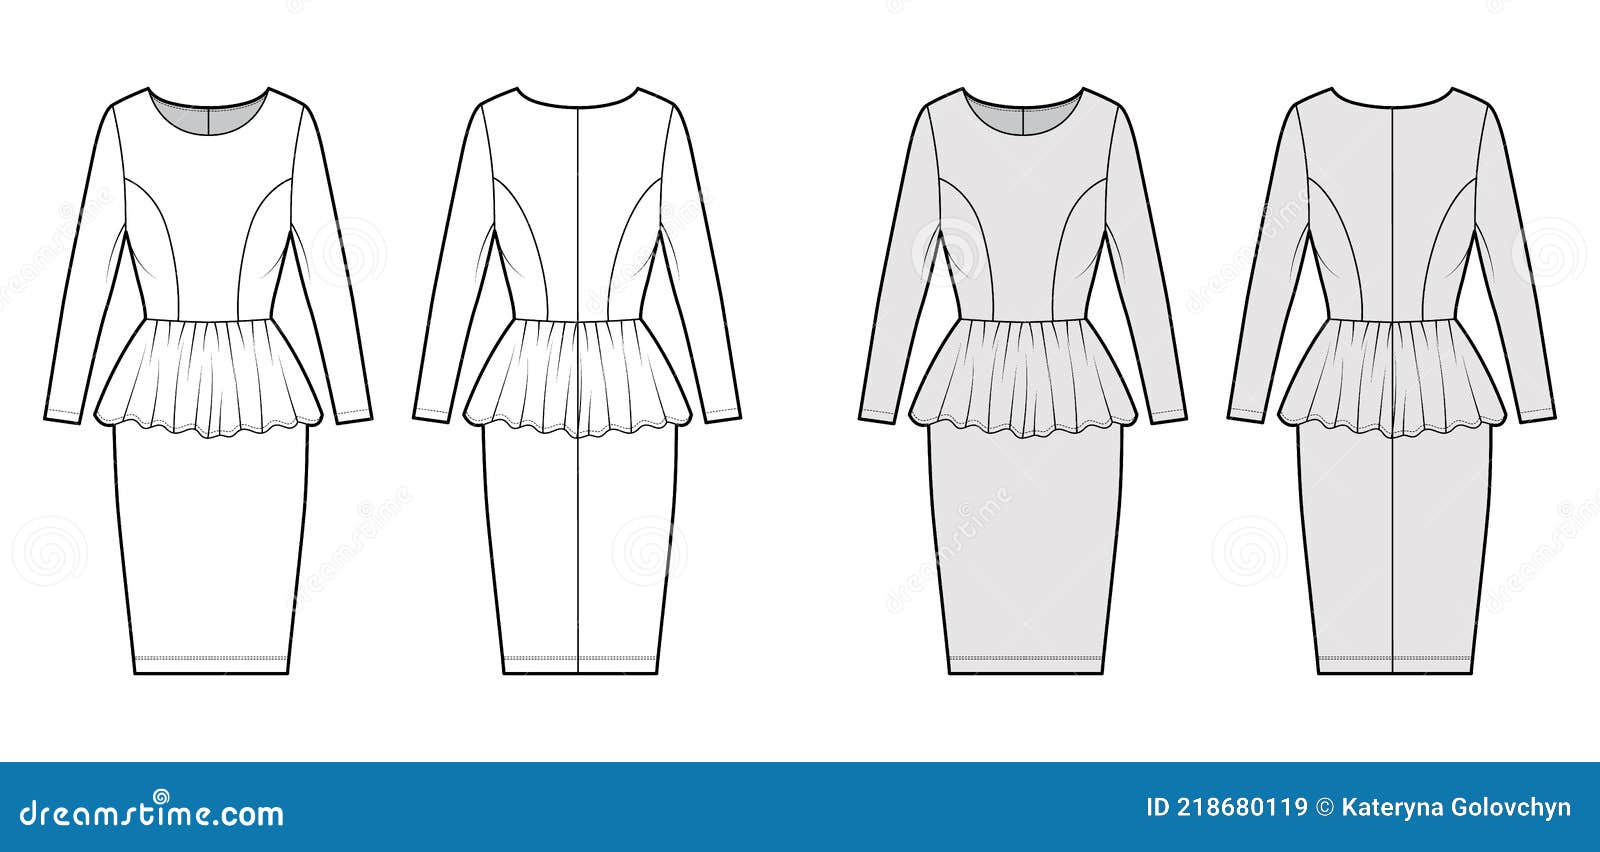 Dress Peplum Technical Fashion Illustration with Long Sleeves, Fitted ...